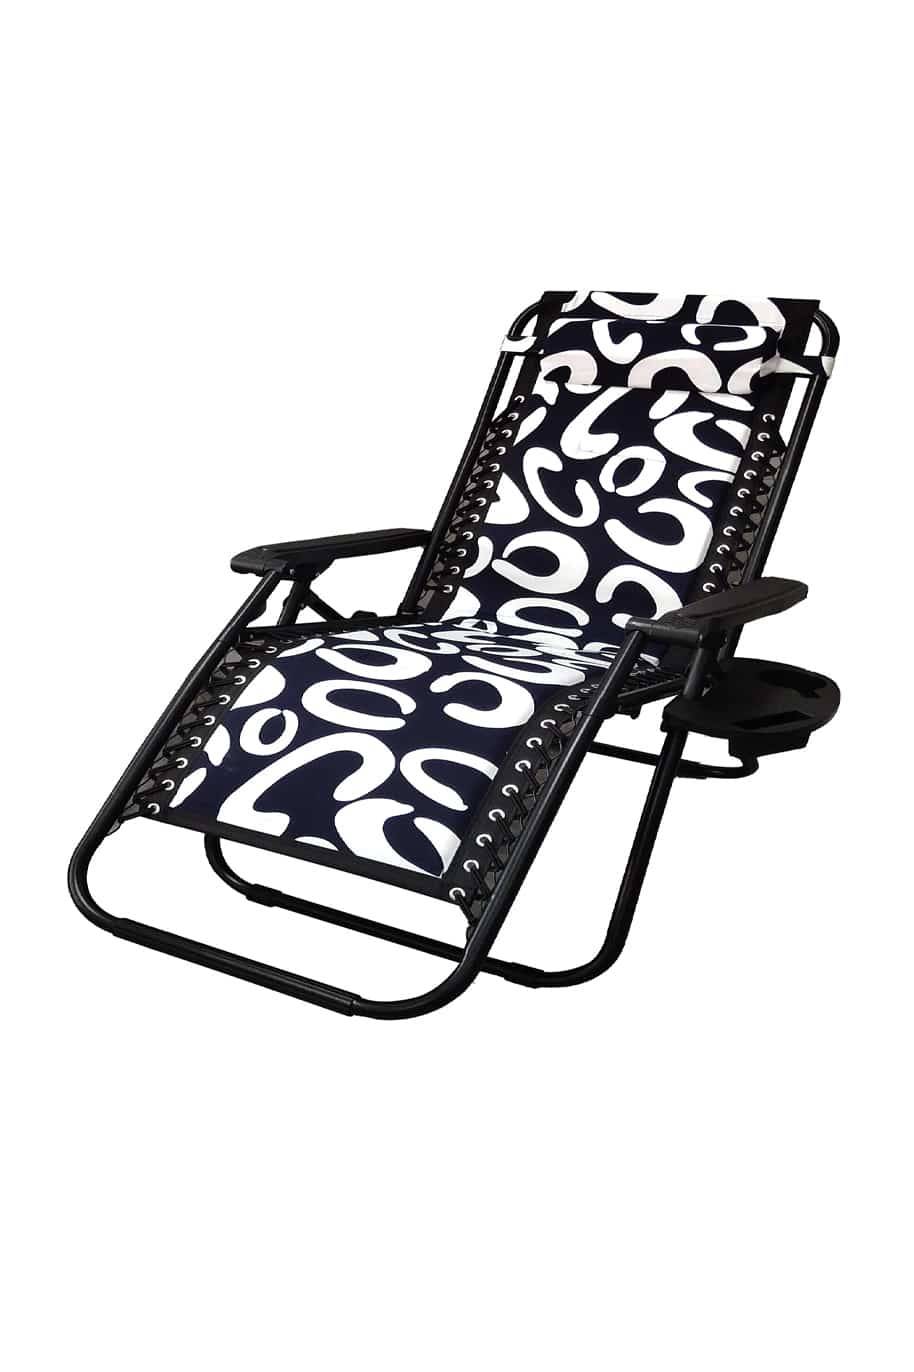 Blue & White Foldable Lounger Chair